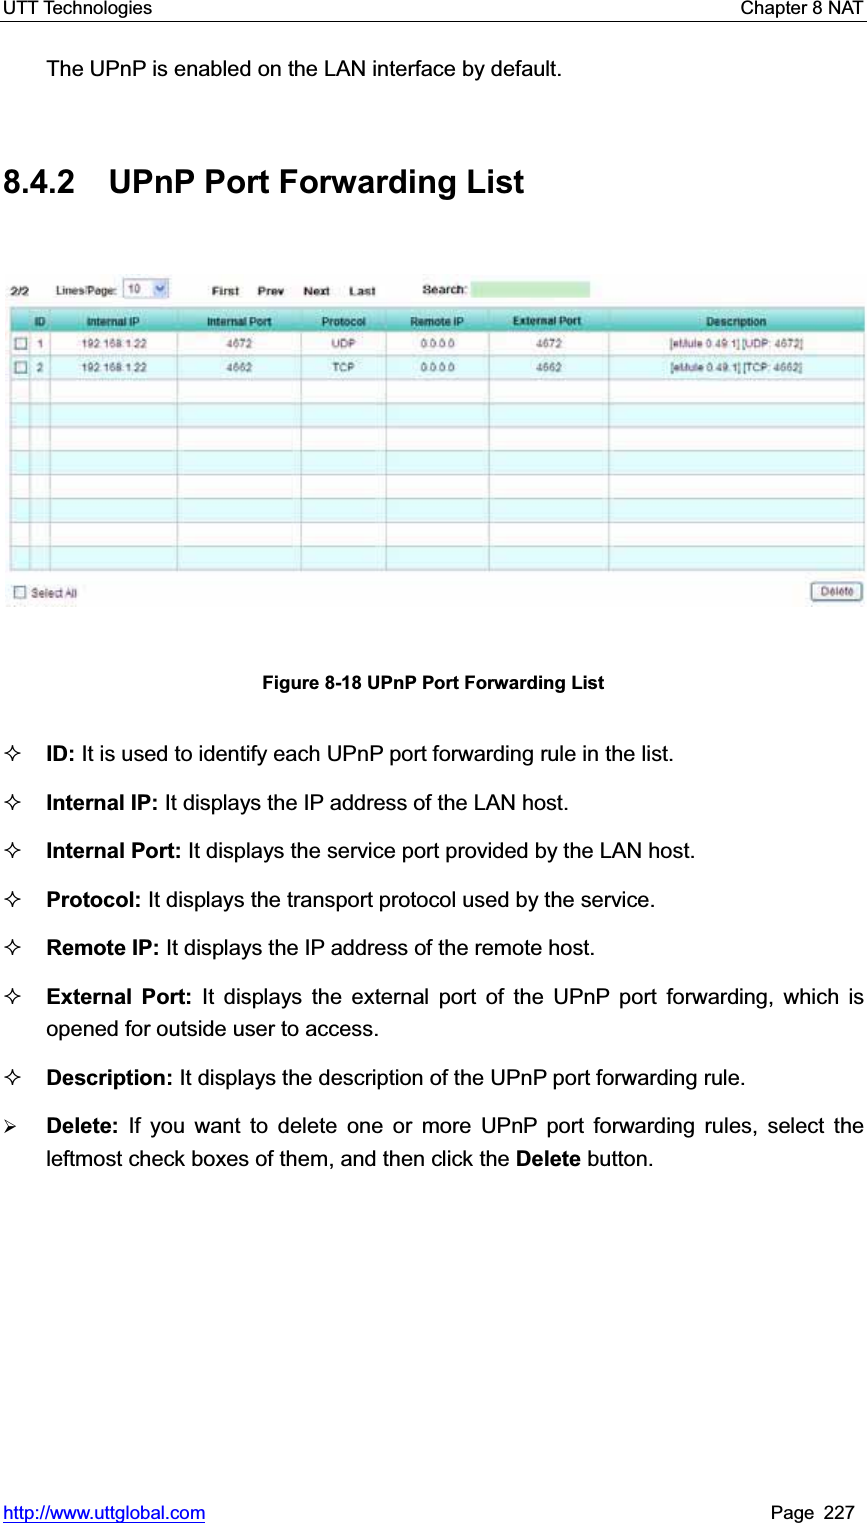 UTT Technologies    Chapter 8 NAT   http://www.uttglobal.com Page 227 The UPnP is enabled on the LAN interface by default.   8.4.2  UPnP Port Forwarding List Figure 8-18 UPnP Port Forwarding ListID: It is used to identify each UPnP port forwarding rule in the list. Internal IP: It displays the IP address of the LAN host. Internal Port: It displays the service port provided by the LAN host. Protocol: It displays the transport protocol used by the service. Remote IP: It displays the IP address of the remote host.   External Port: It displays the external port of the UPnP port forwarding, which is opened for outside user to access. Description: It displays the description of the UPnP port forwarding rule.   ¾Delete:  If you want to delete one or more UPnP port forwarding rules, select the leftmost check boxes of them, and then click the Delete button.